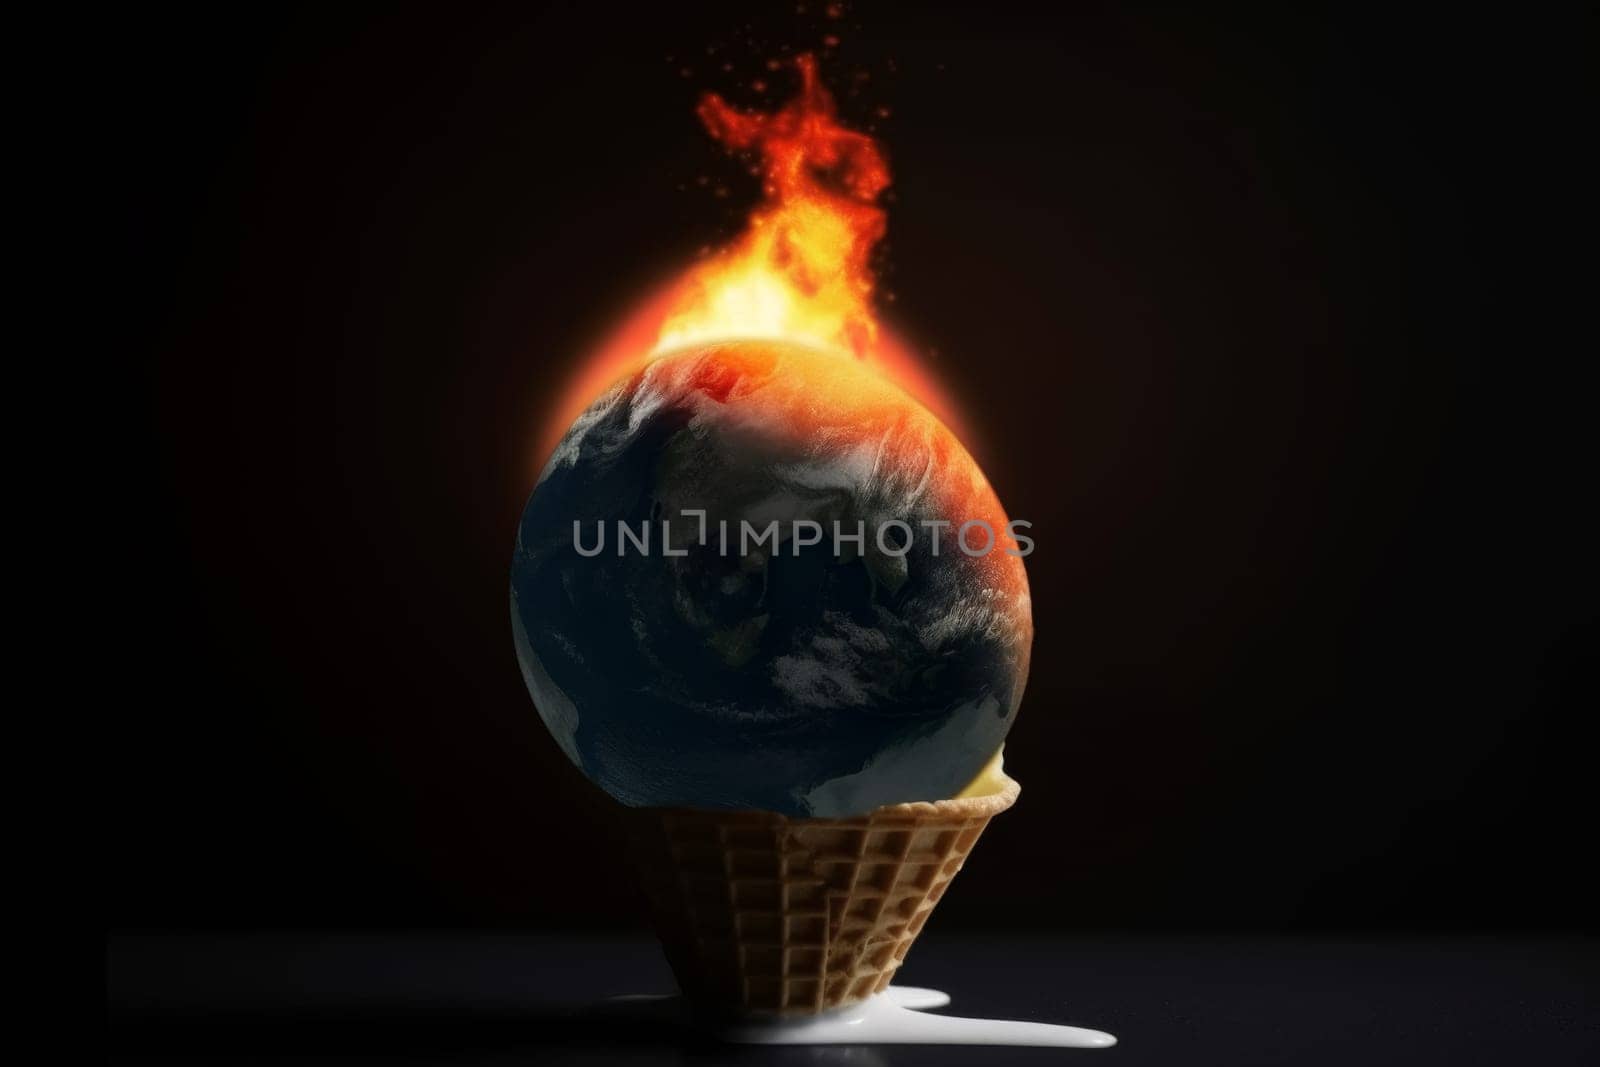 A provocative concept image showcasing Earth as an ice cream scoop, aflame on top, melting over a dark background, symbolizing climate change